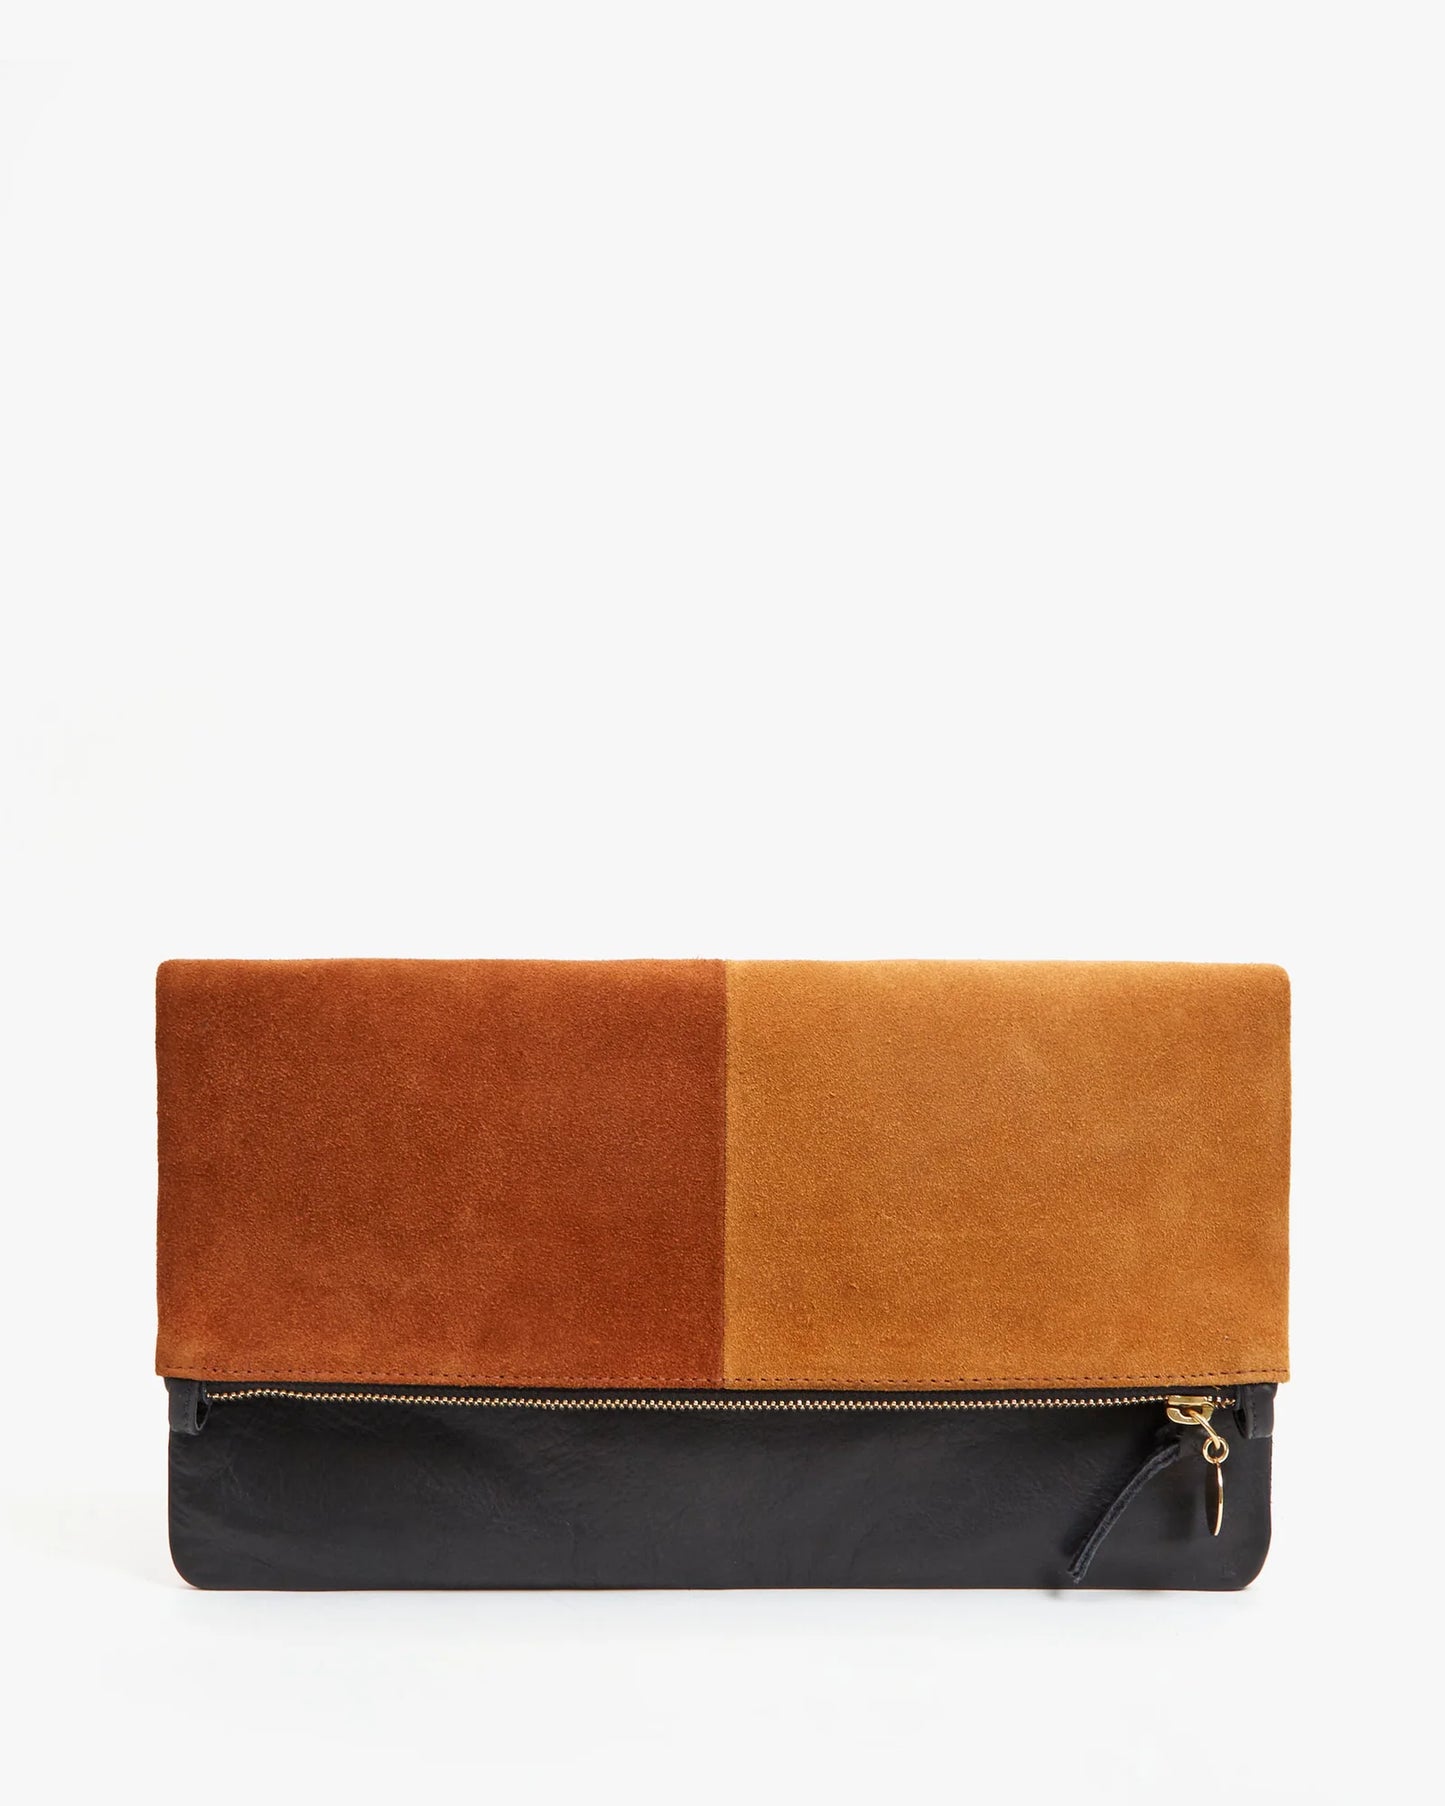 Clare V Foldover Clutch W/ Tabs - Suede and Nappa Multi Patchwork